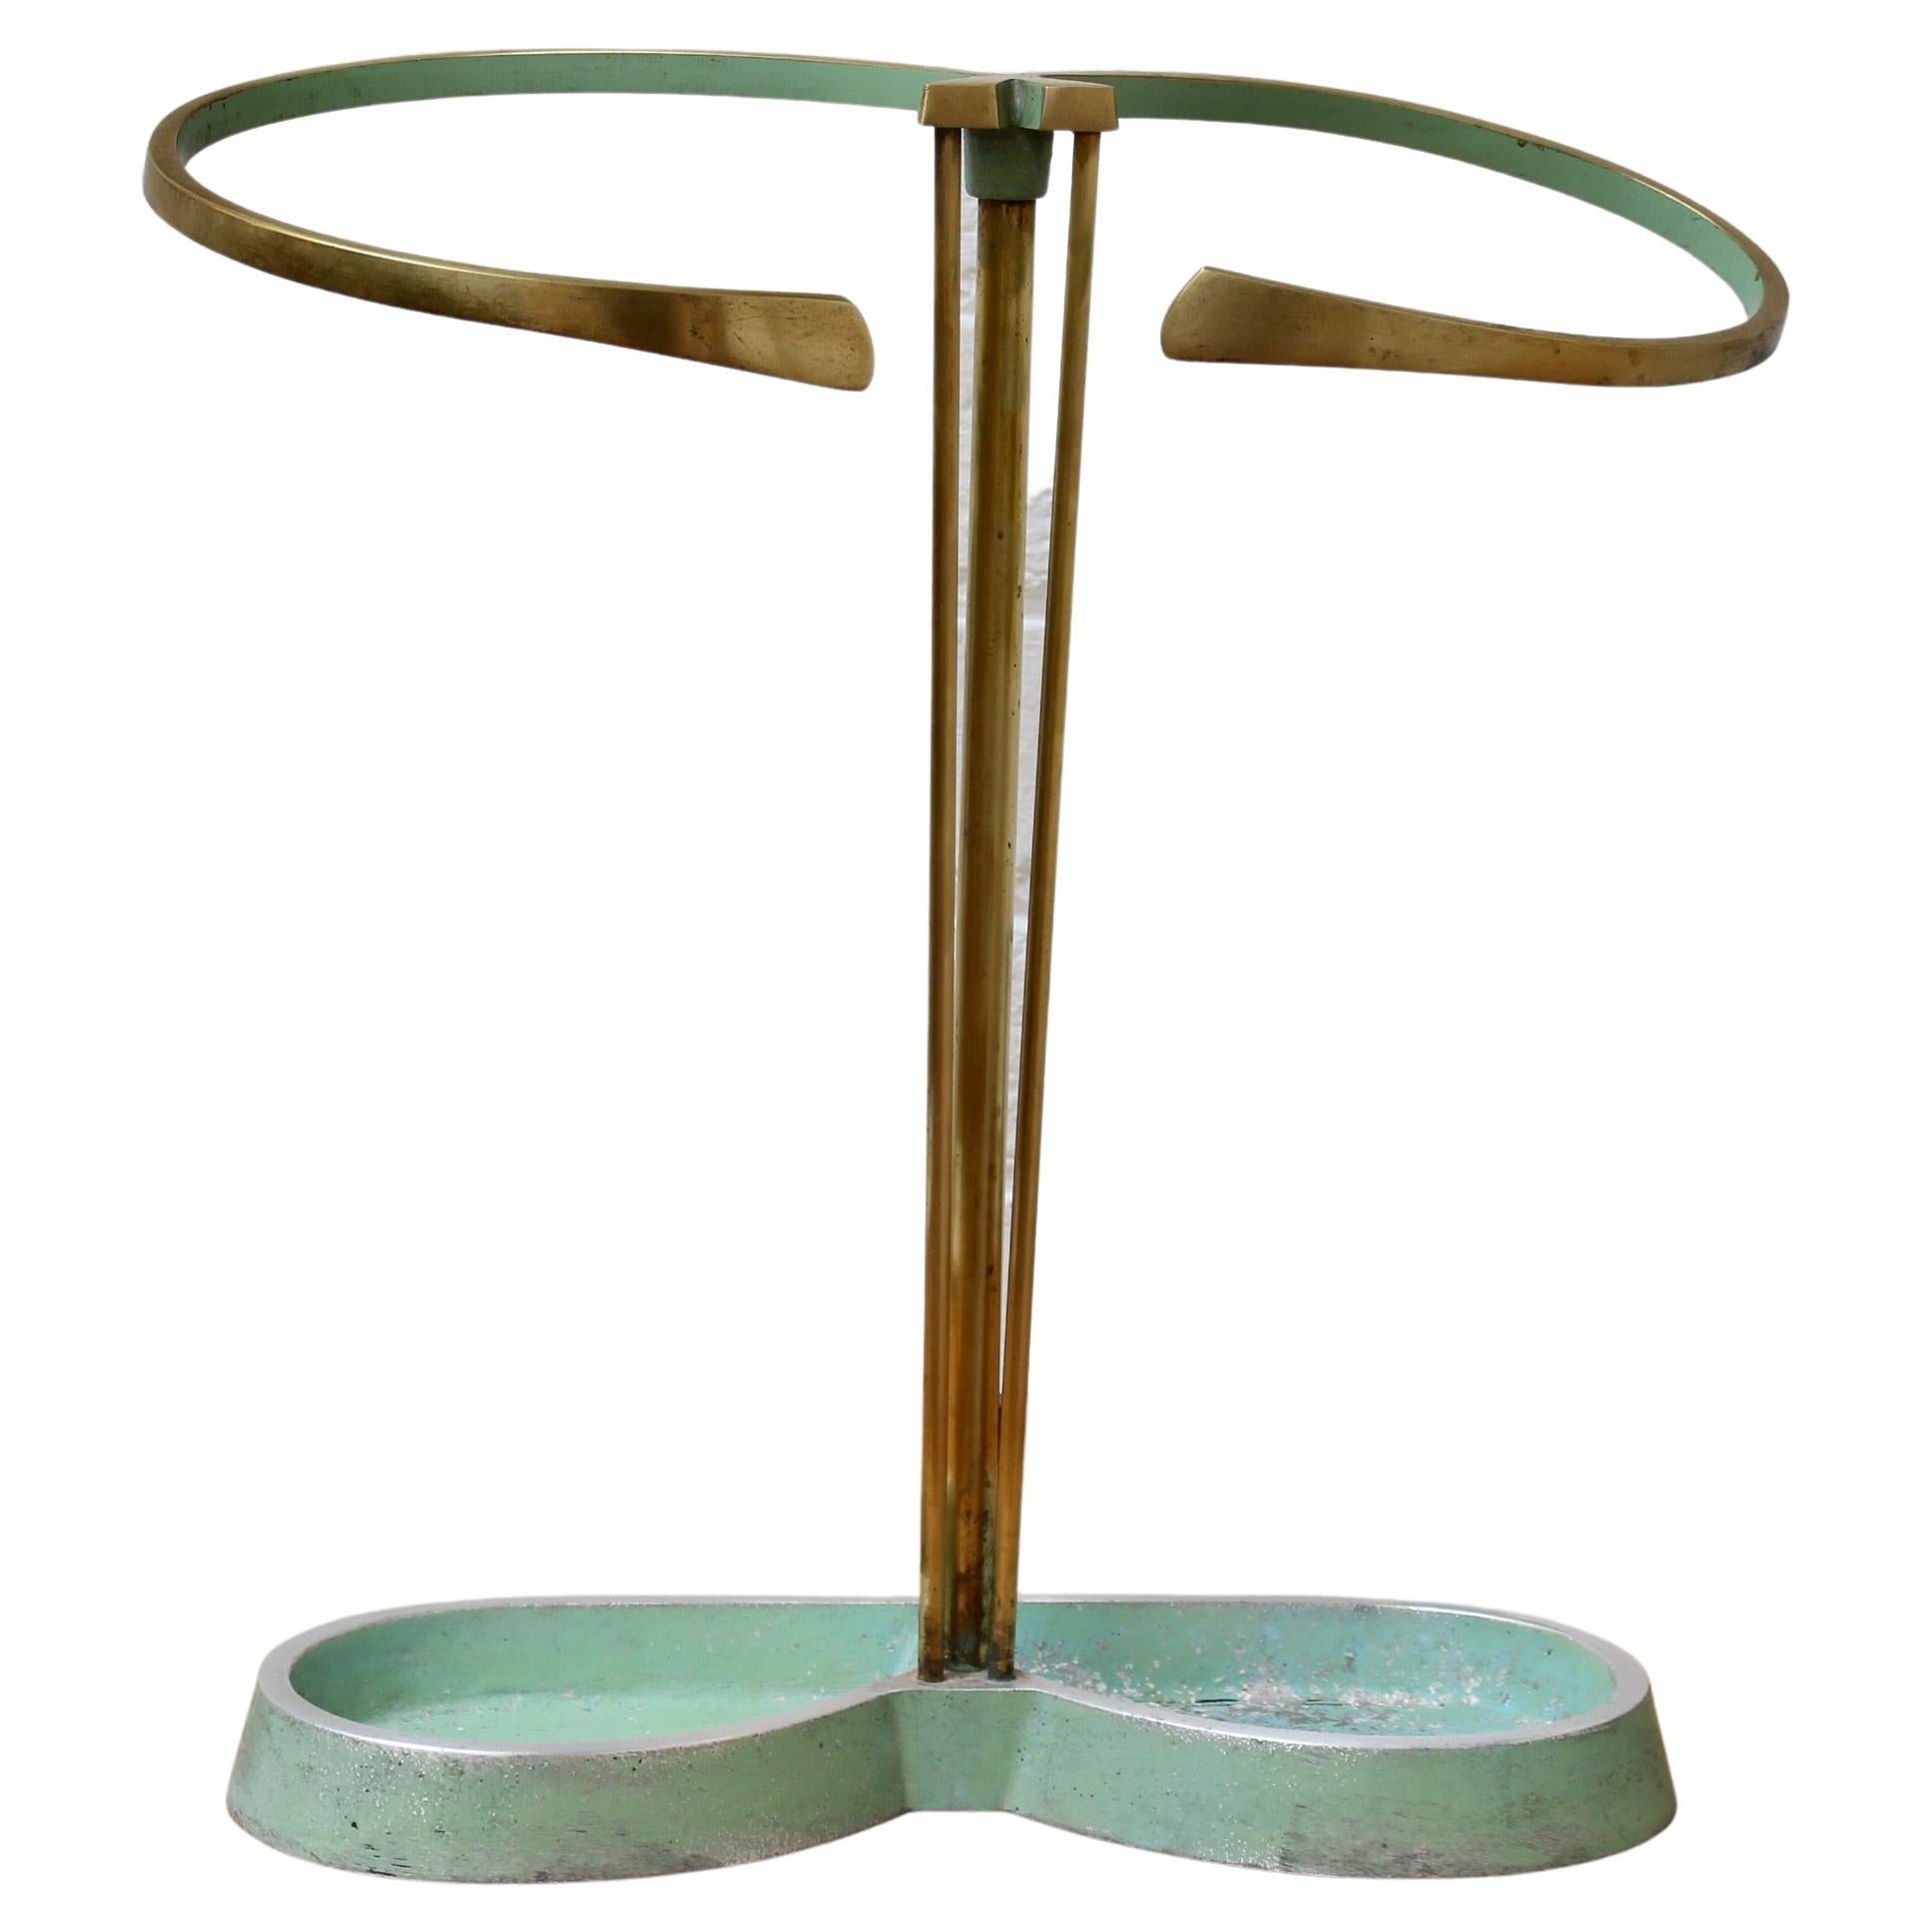 Midcentury Modern Brass Umbrella Stand Attributed to Artes H&H Seefried Steppach For Sale